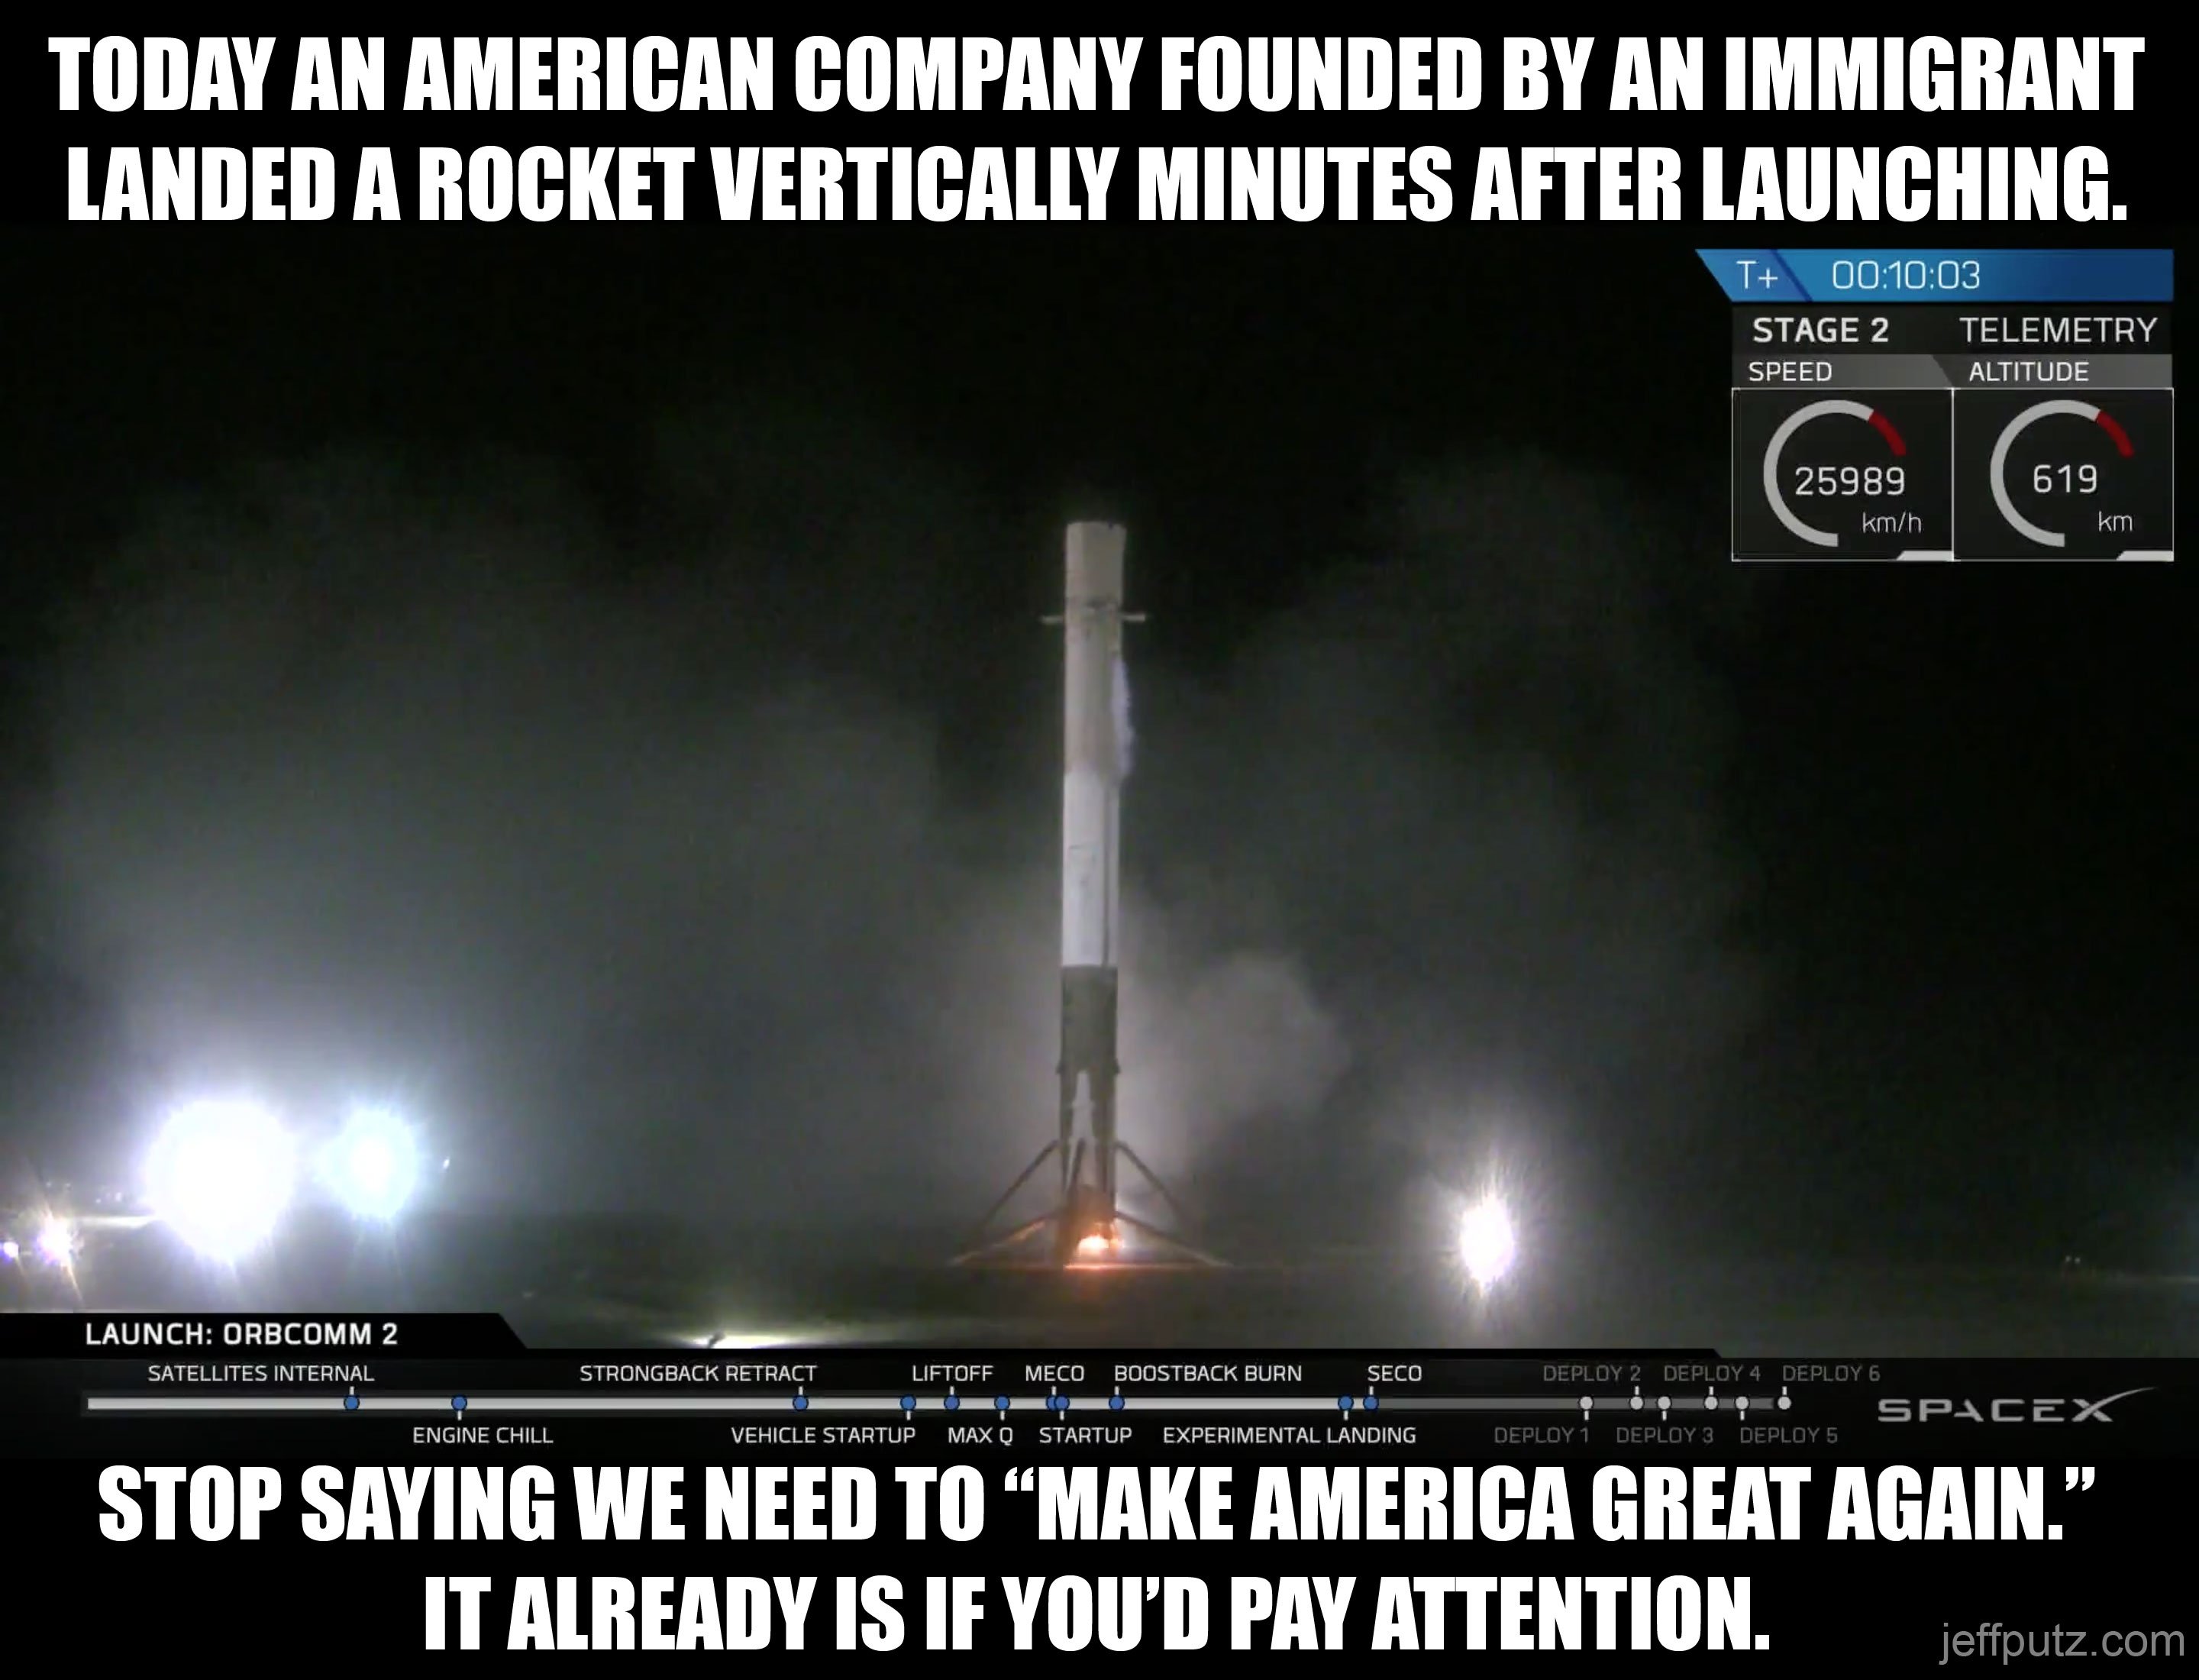 Today an American company founded by an immigrant landed a rocket vertically minutes after launching. Stop saying we need to 'make America great again.' It already is if you'd pay attention.